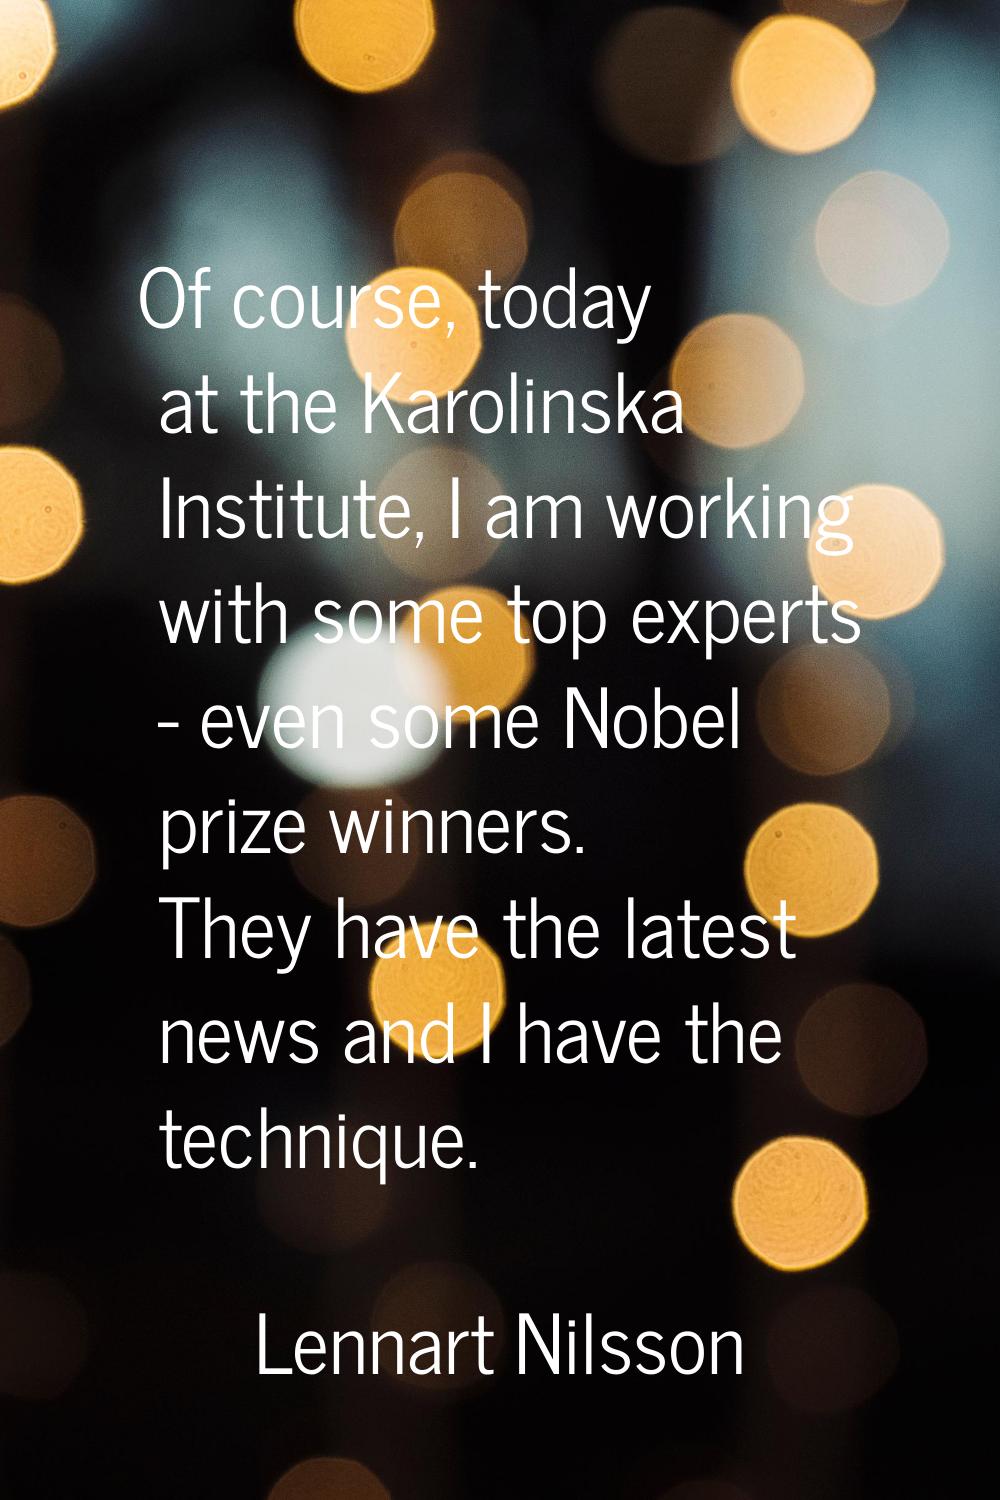 Of course, today at the Karolinska Institute, I am working with some top experts - even some Nobel 